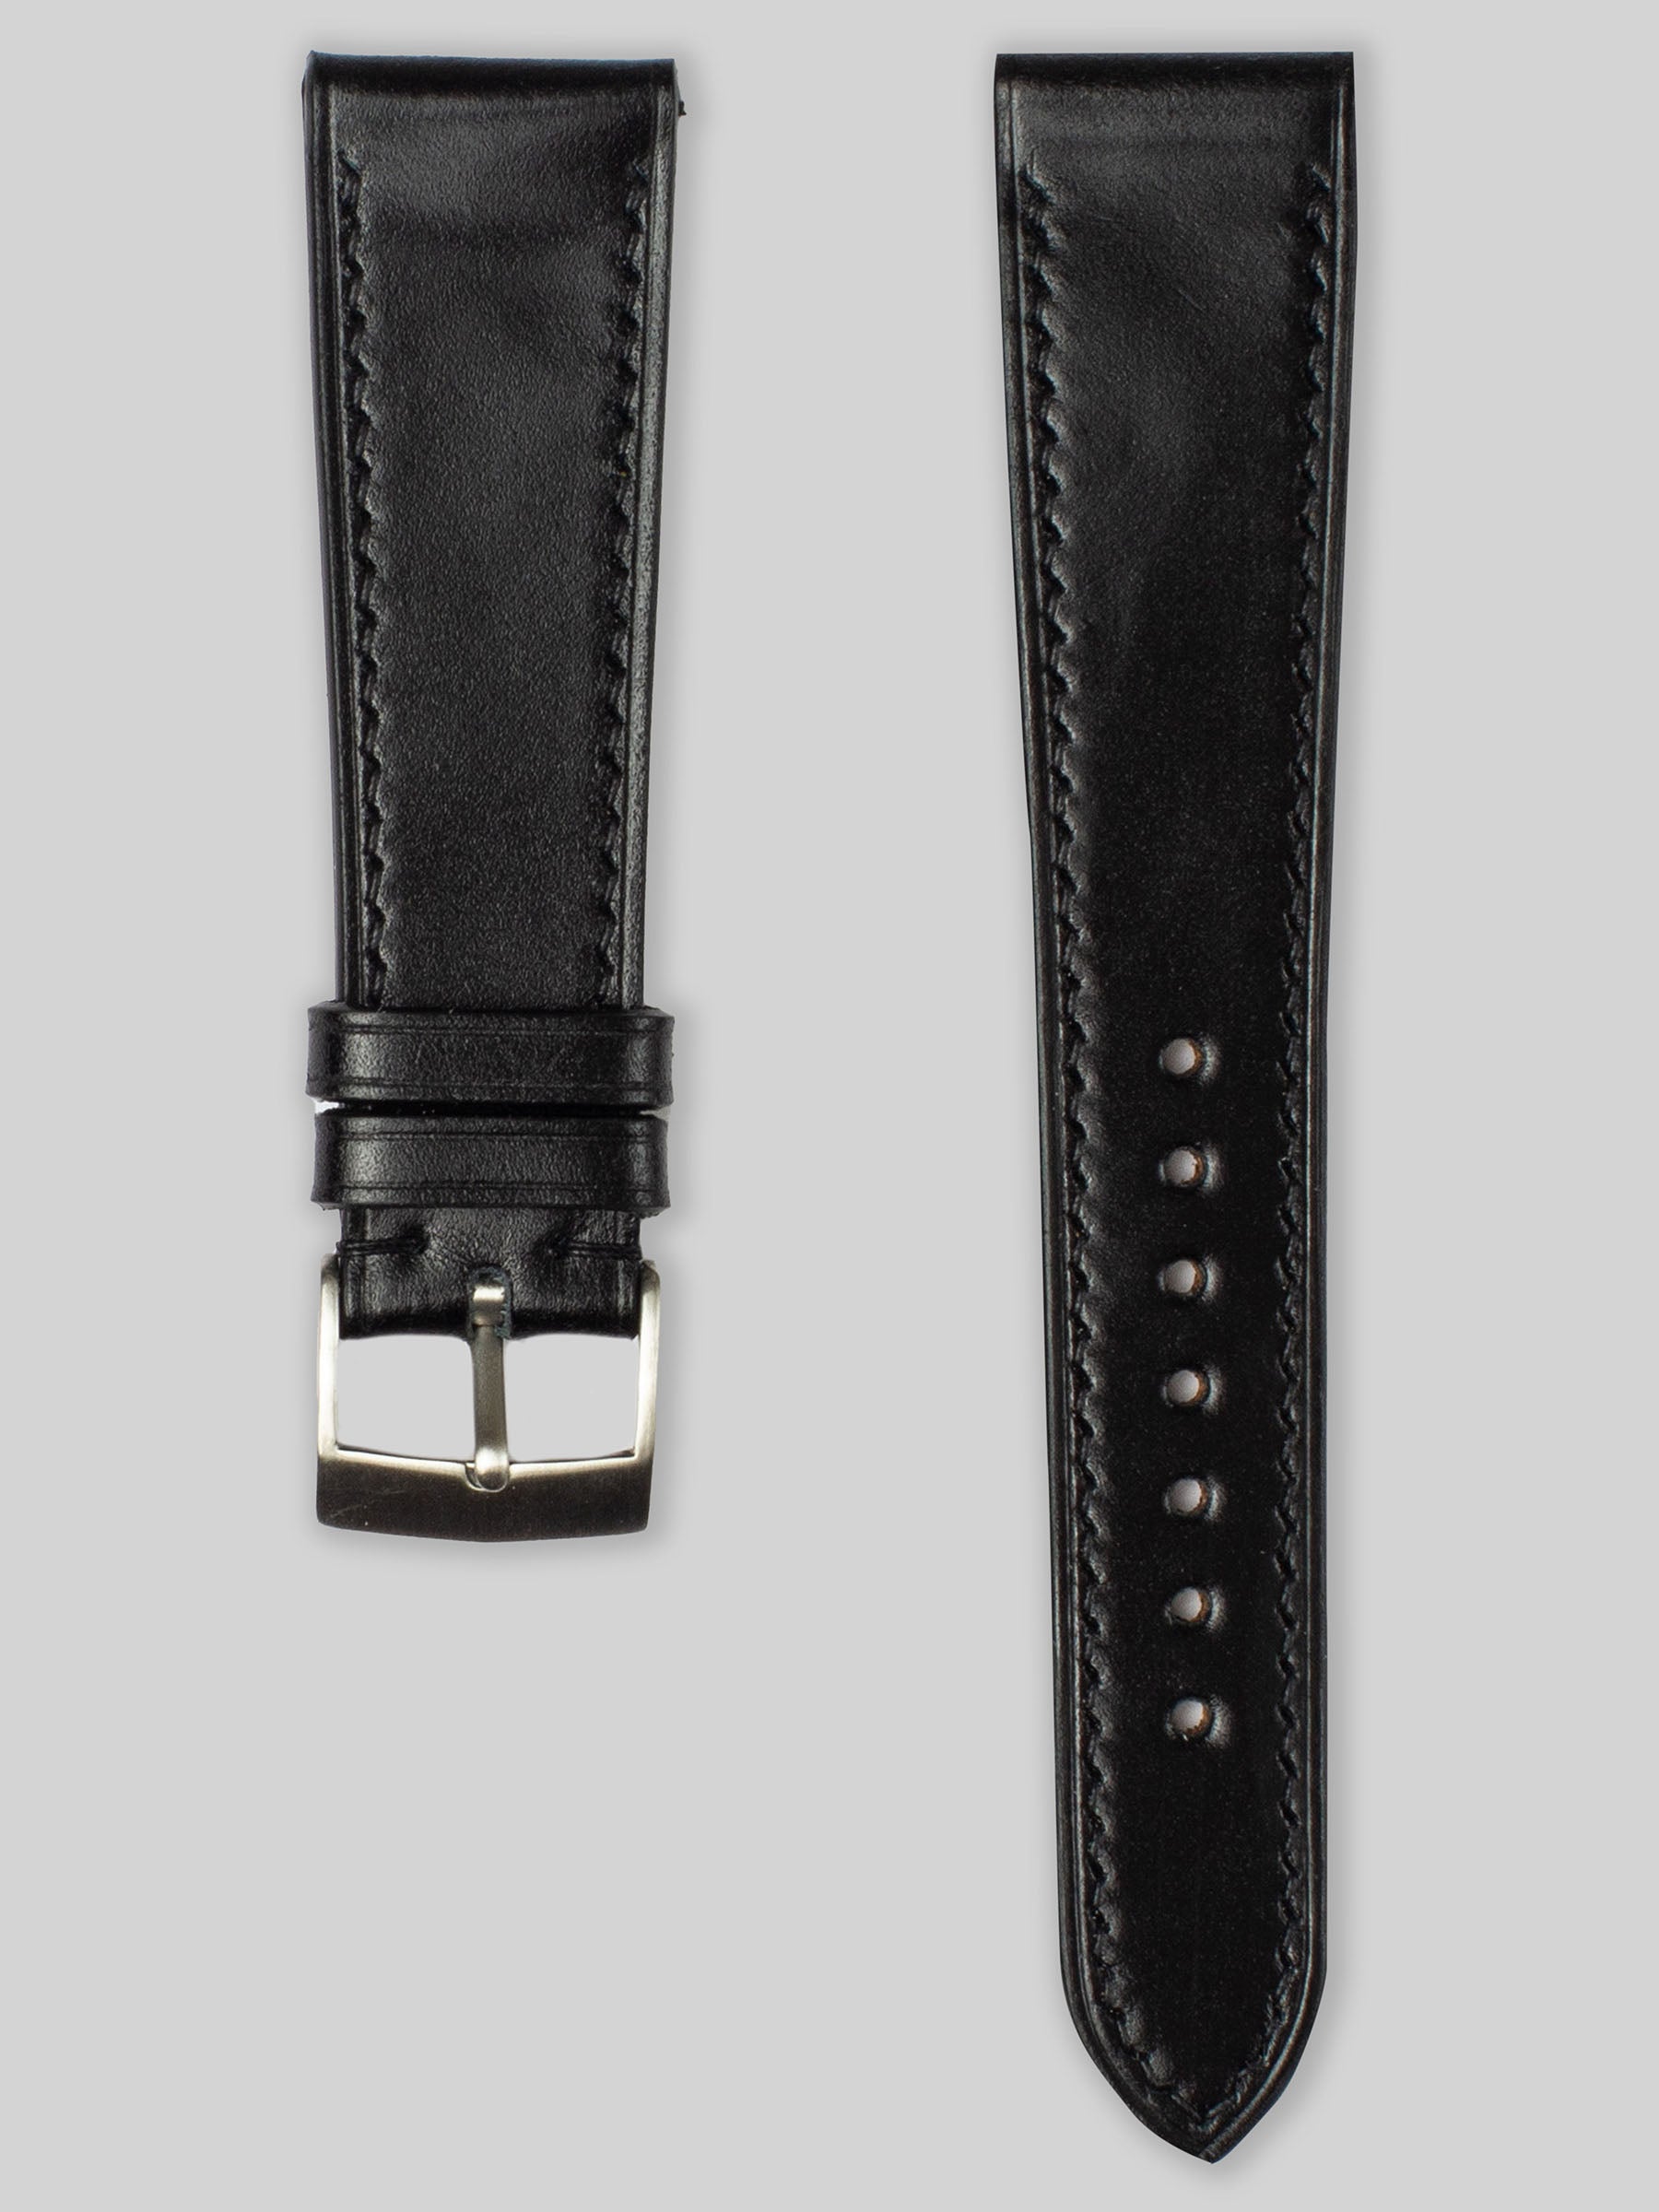 Shell Cordovan Leather Watch Strap - Black